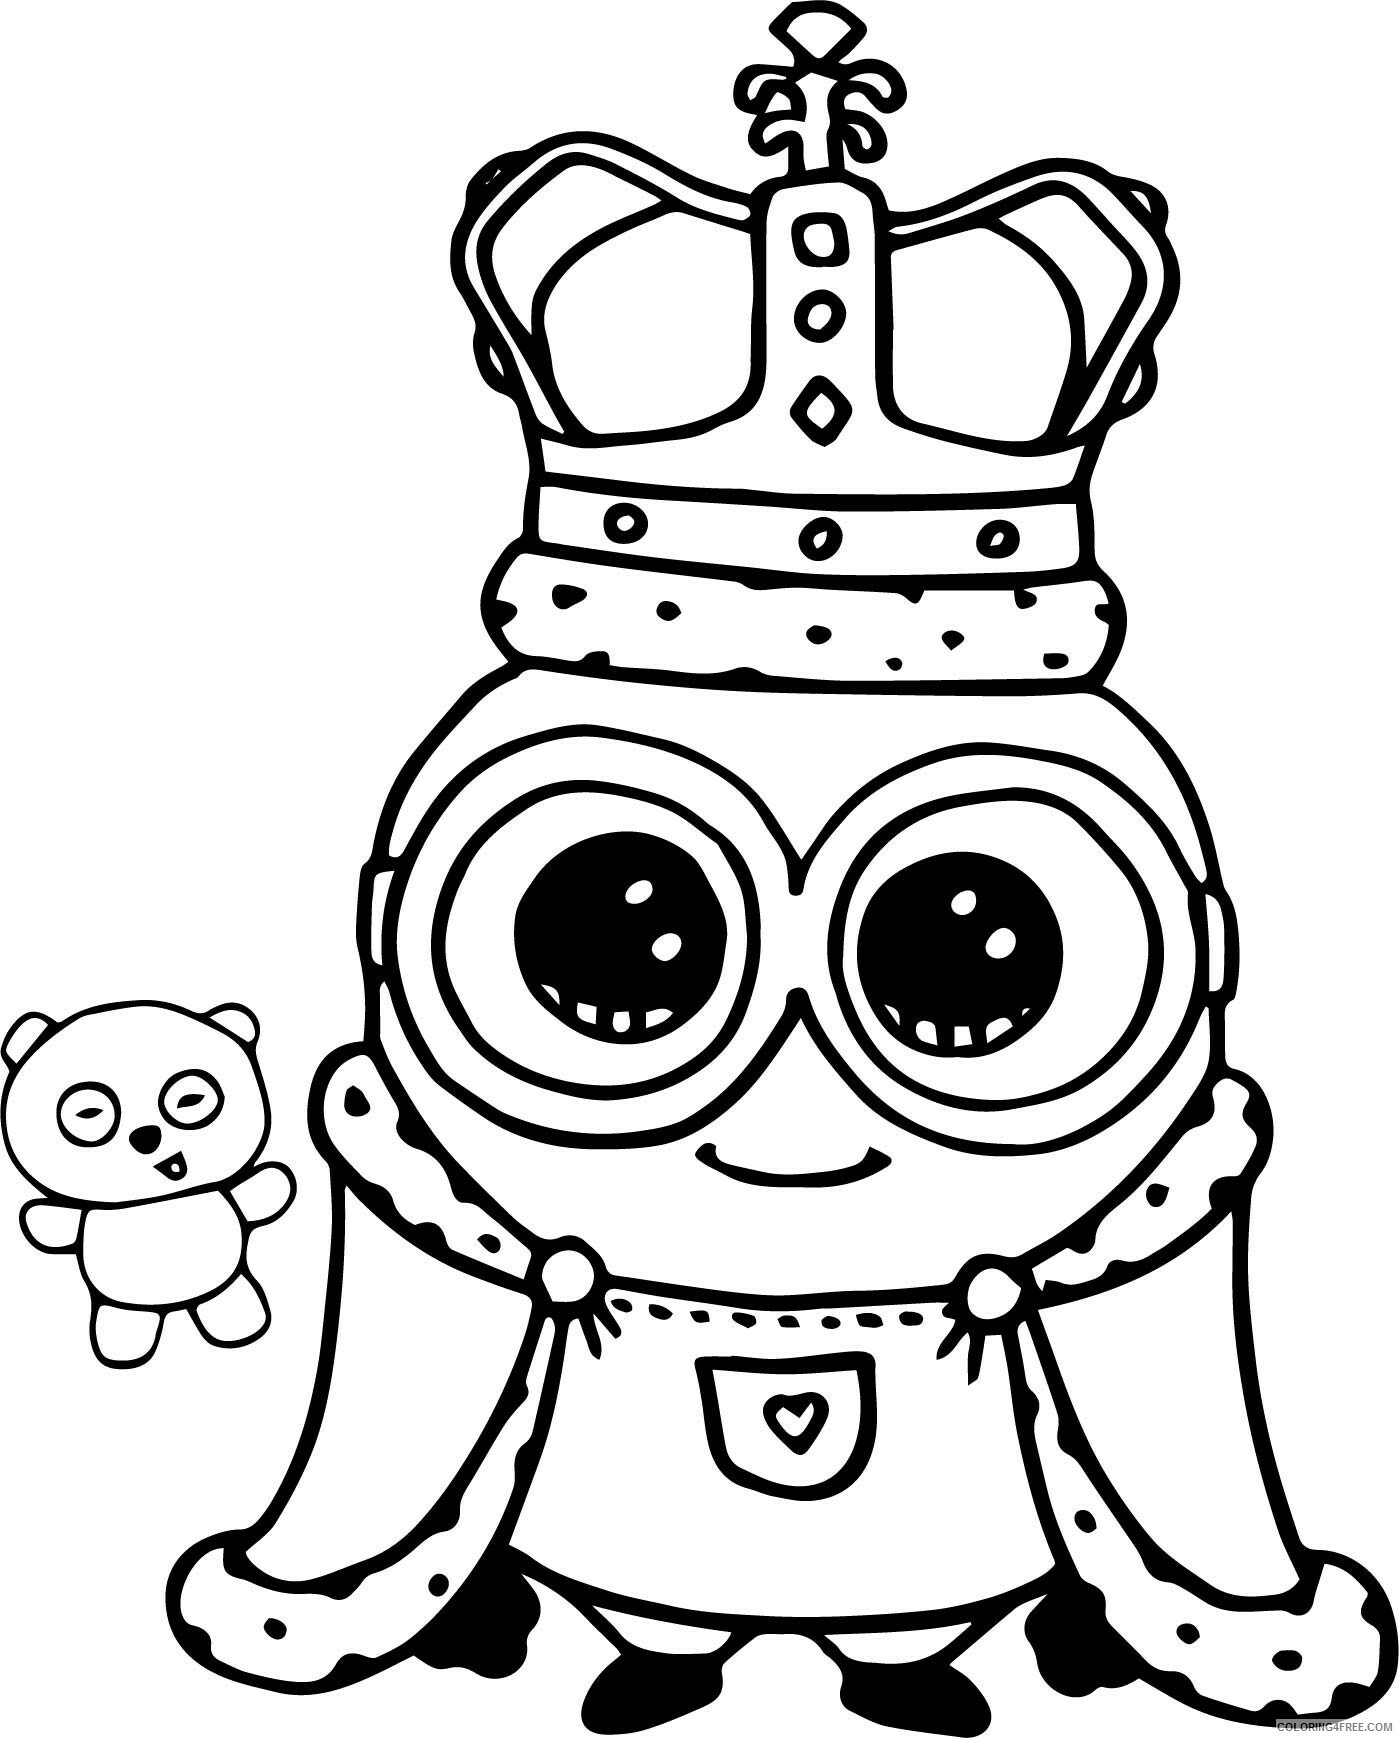 Minions Coloring Pages Tv Film Cute Minion Printable 2020 05172 Coloring4free Coloring4free Com